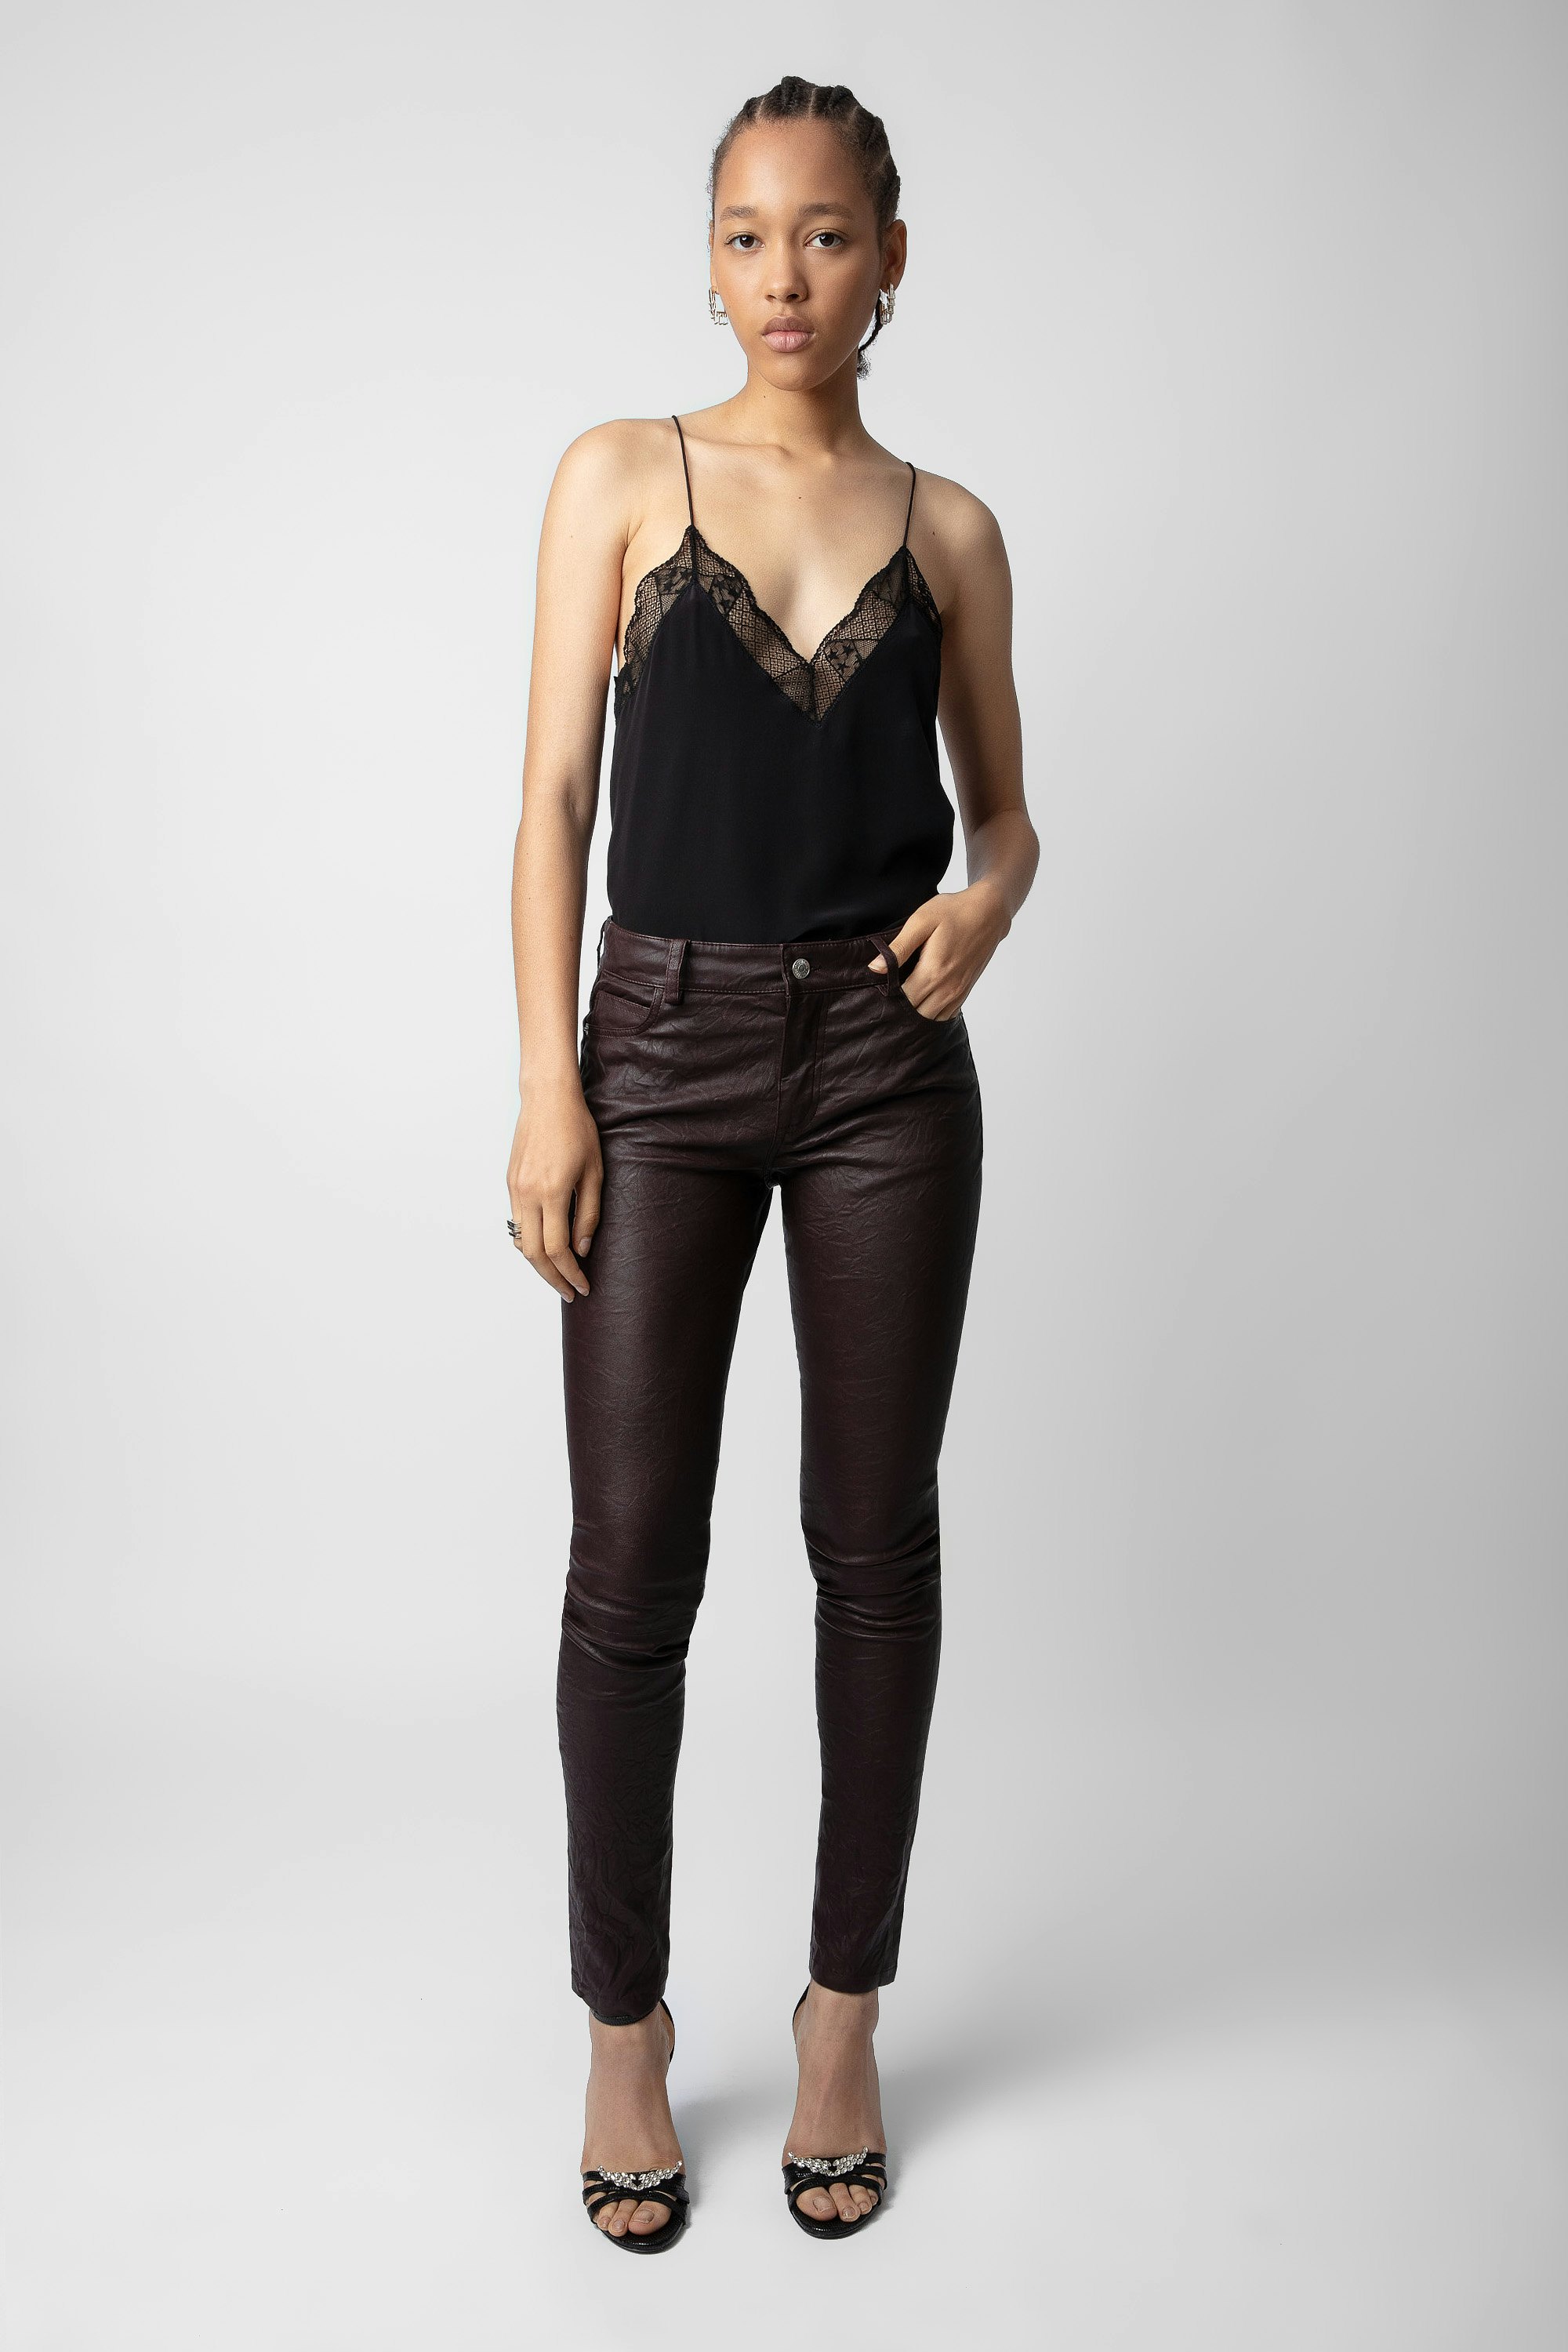 Phlame Crinkled Leather Pants - Women’s brown crinkled leather pants.